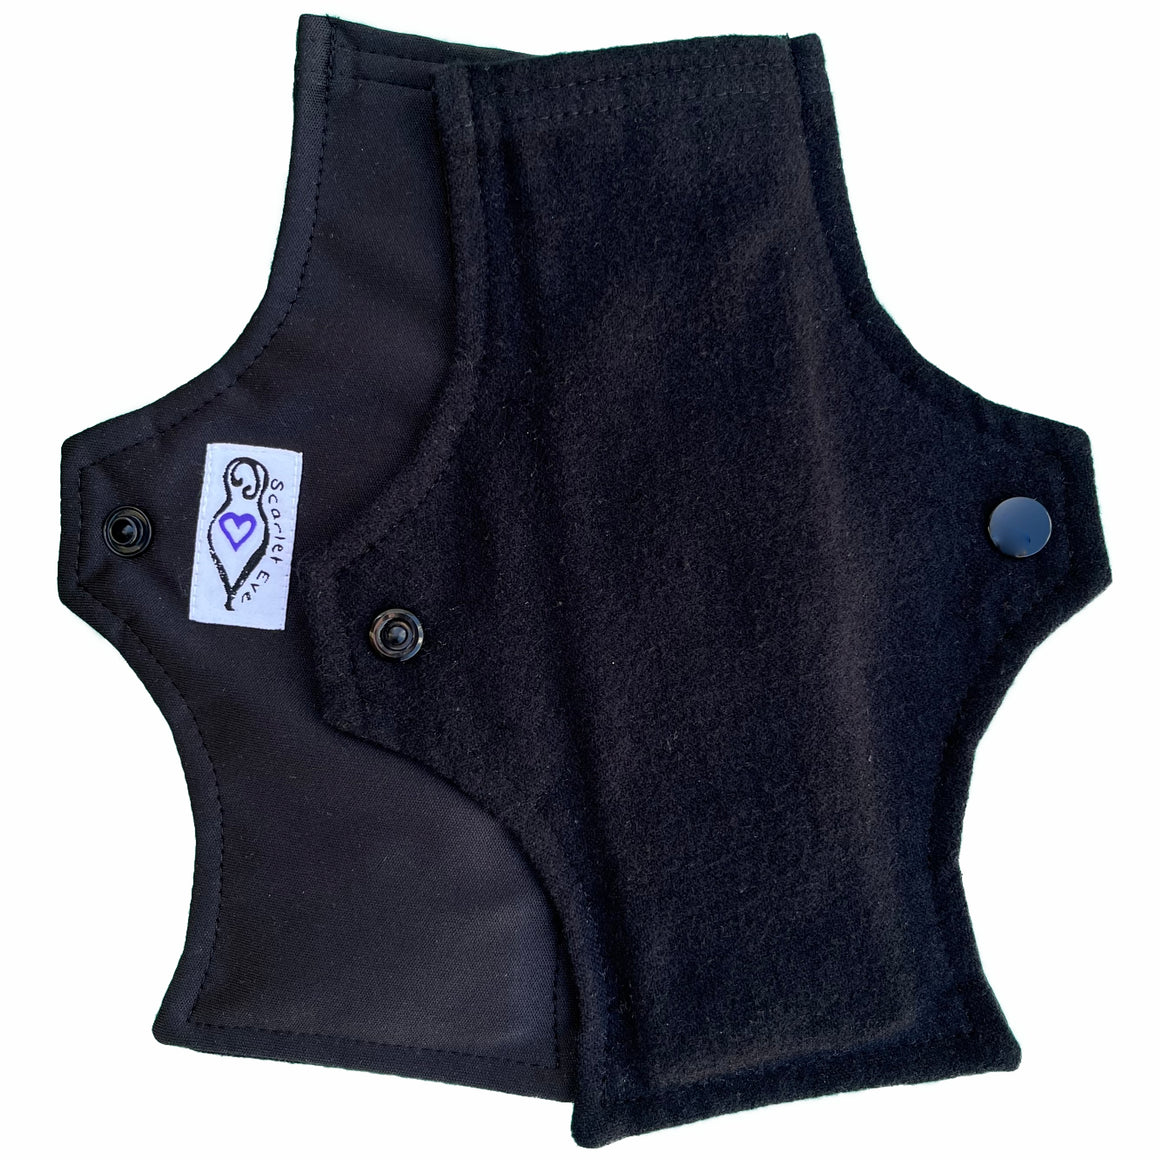 Scarlet Eve Basics New Woman Pad. Top: Soft, black cotton flannel. Back: Solid Black PUL. 3 layer flip out bamboo fleece booster. New Woman Pads are designed with the young teen in mind.